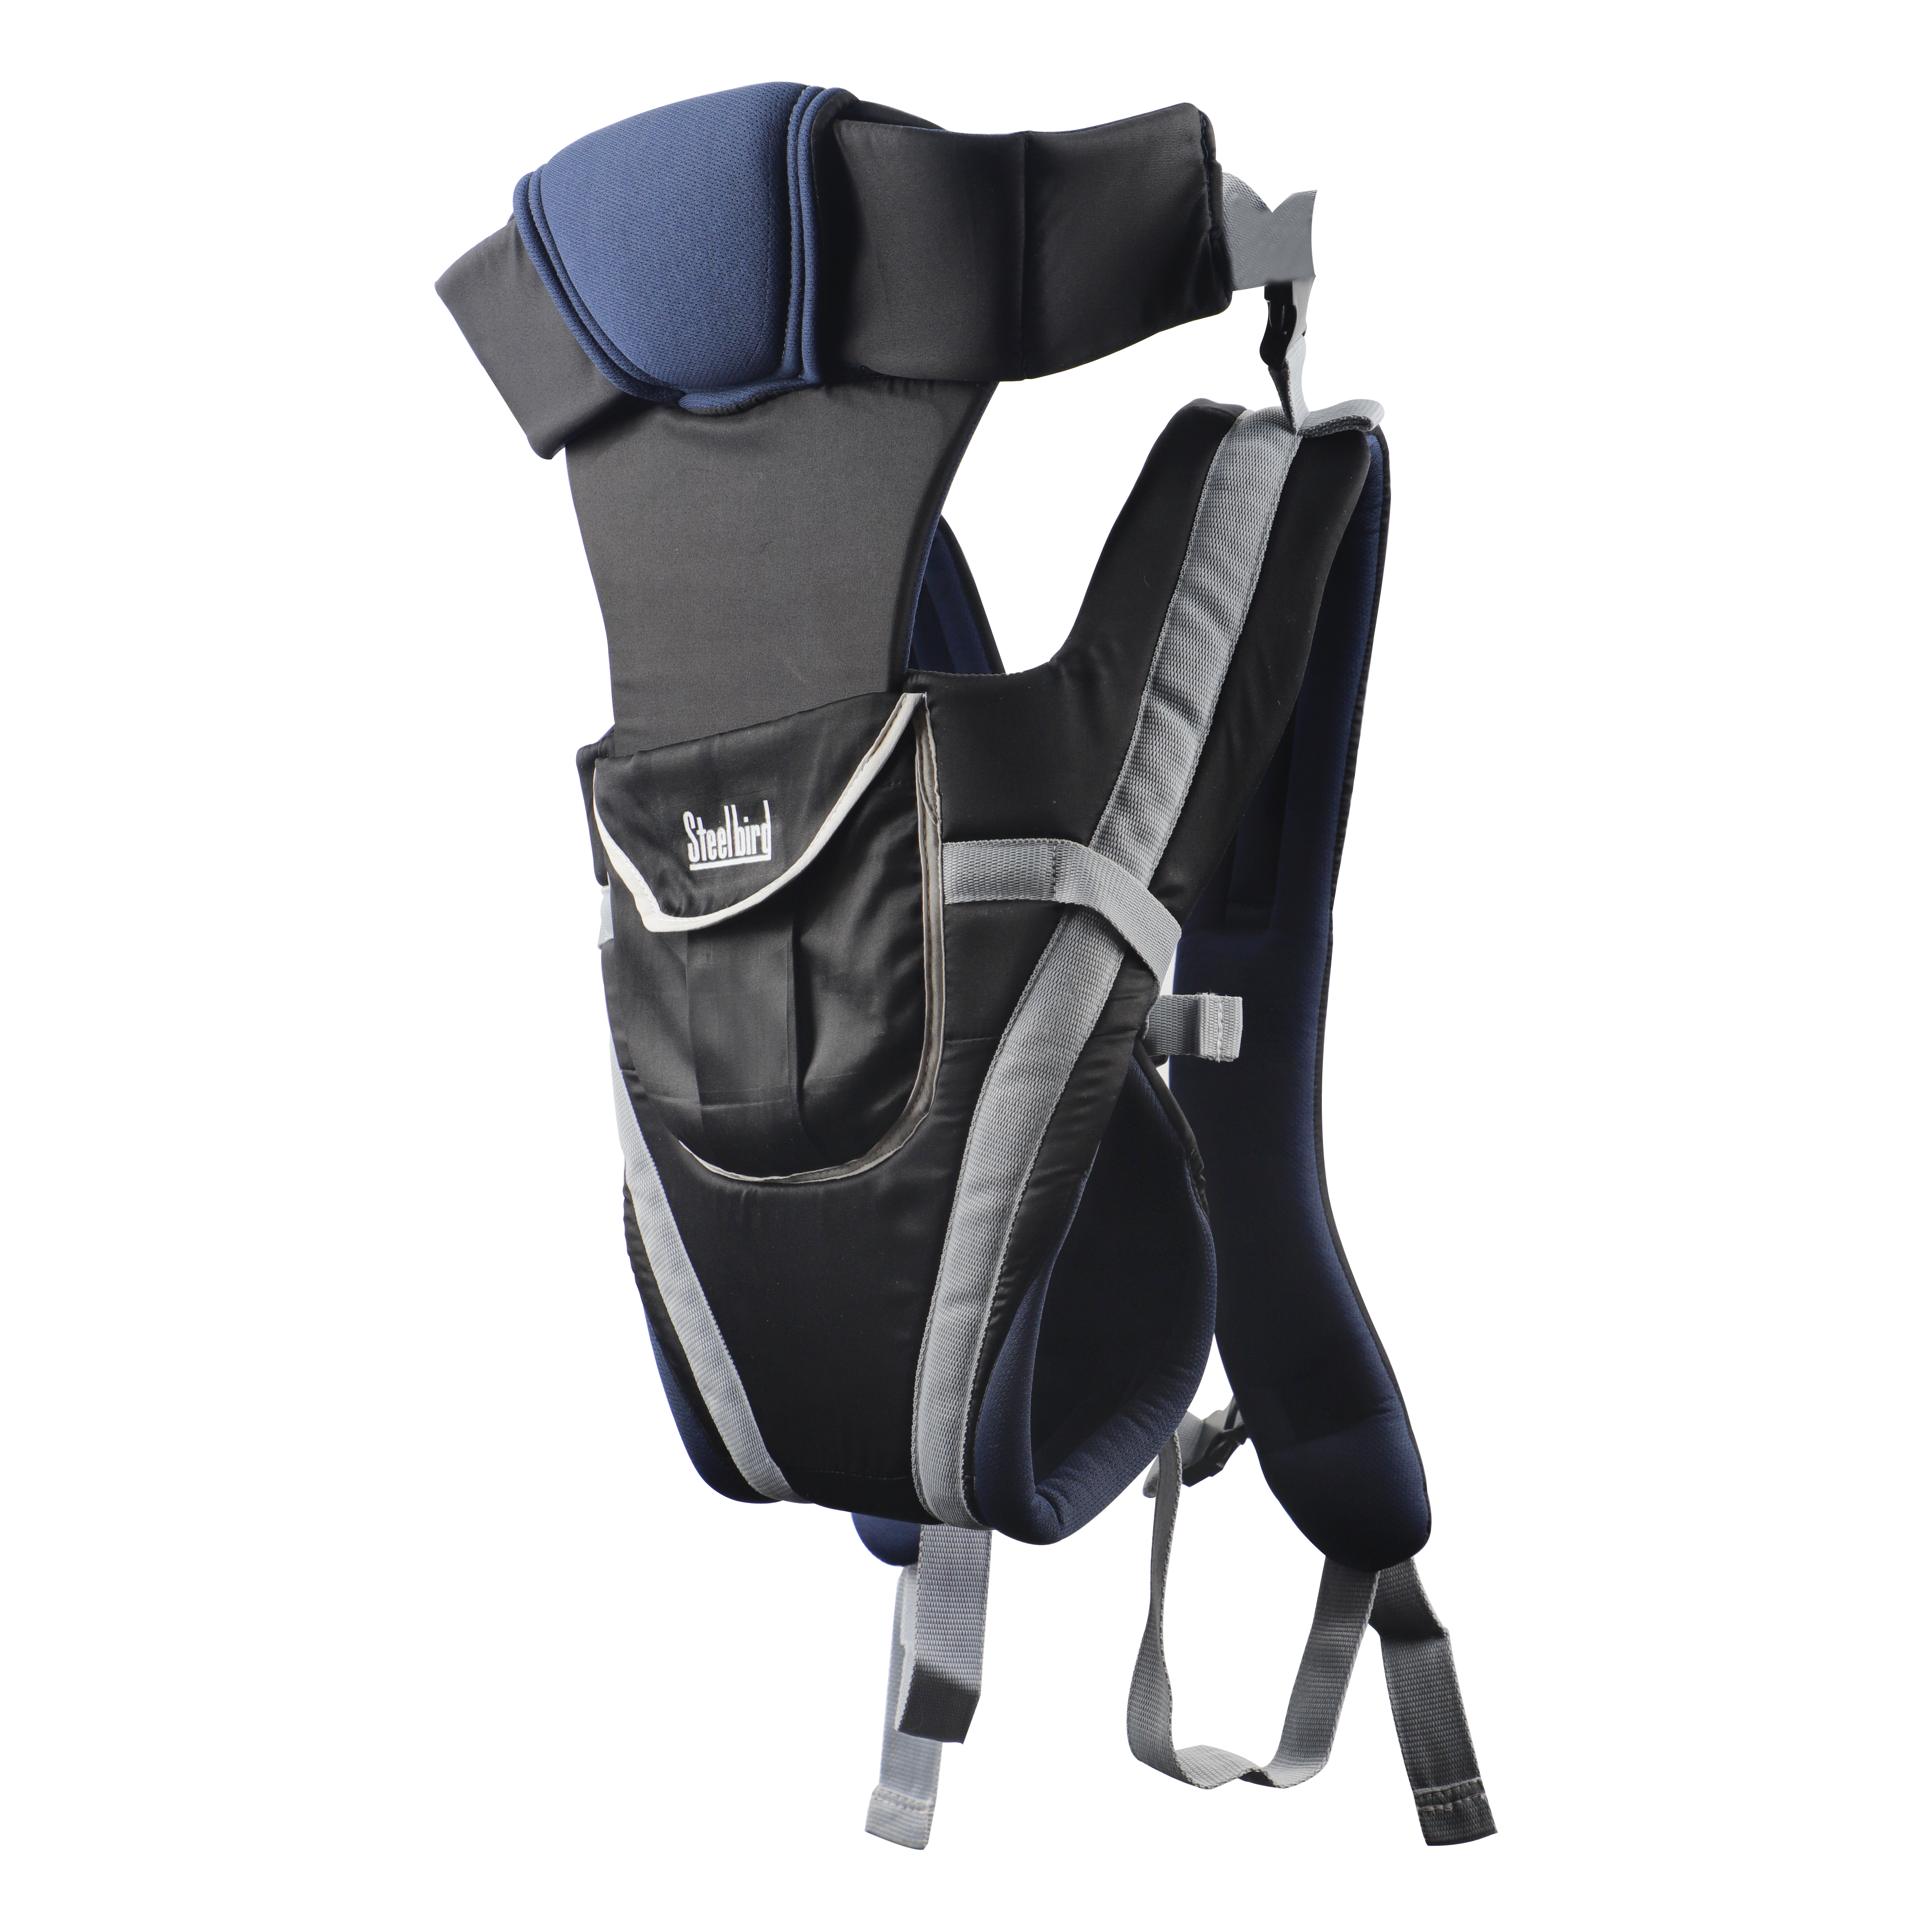 Steelbird Premium Kids 4-in-1 Adjustable Baby Carrier Cum Kangaroo Bag With Lumbar Support-Lightweight And Breathable-Back-Front Carrier For Baby With Safety Belt-Max Weight Up To 15 Kg (Blue Black)